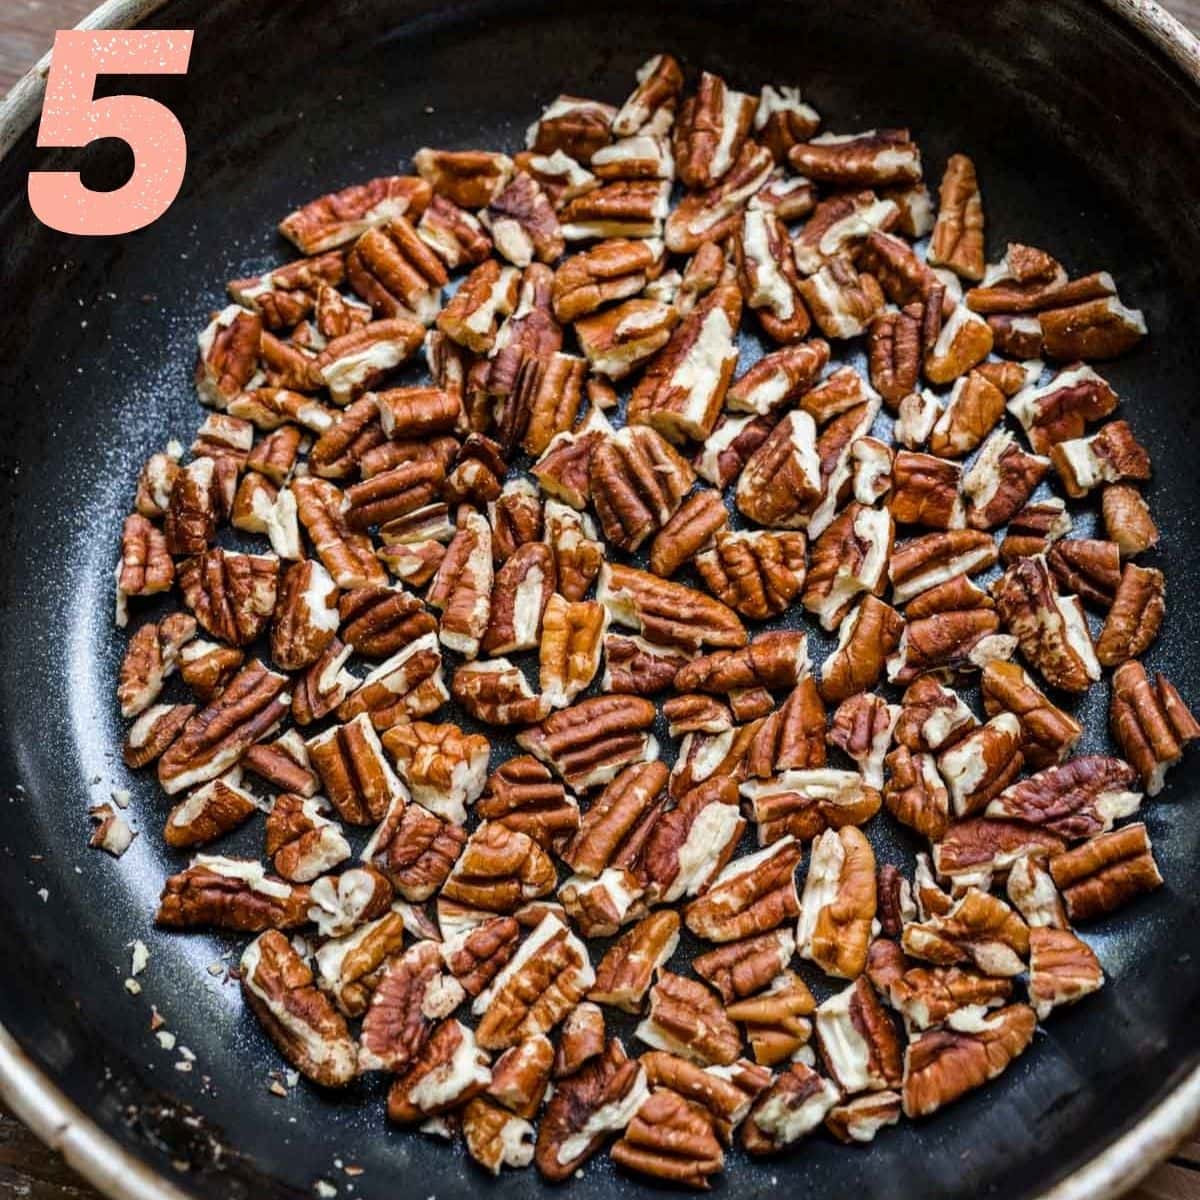 Overhead view of pecans roasting in a pan.